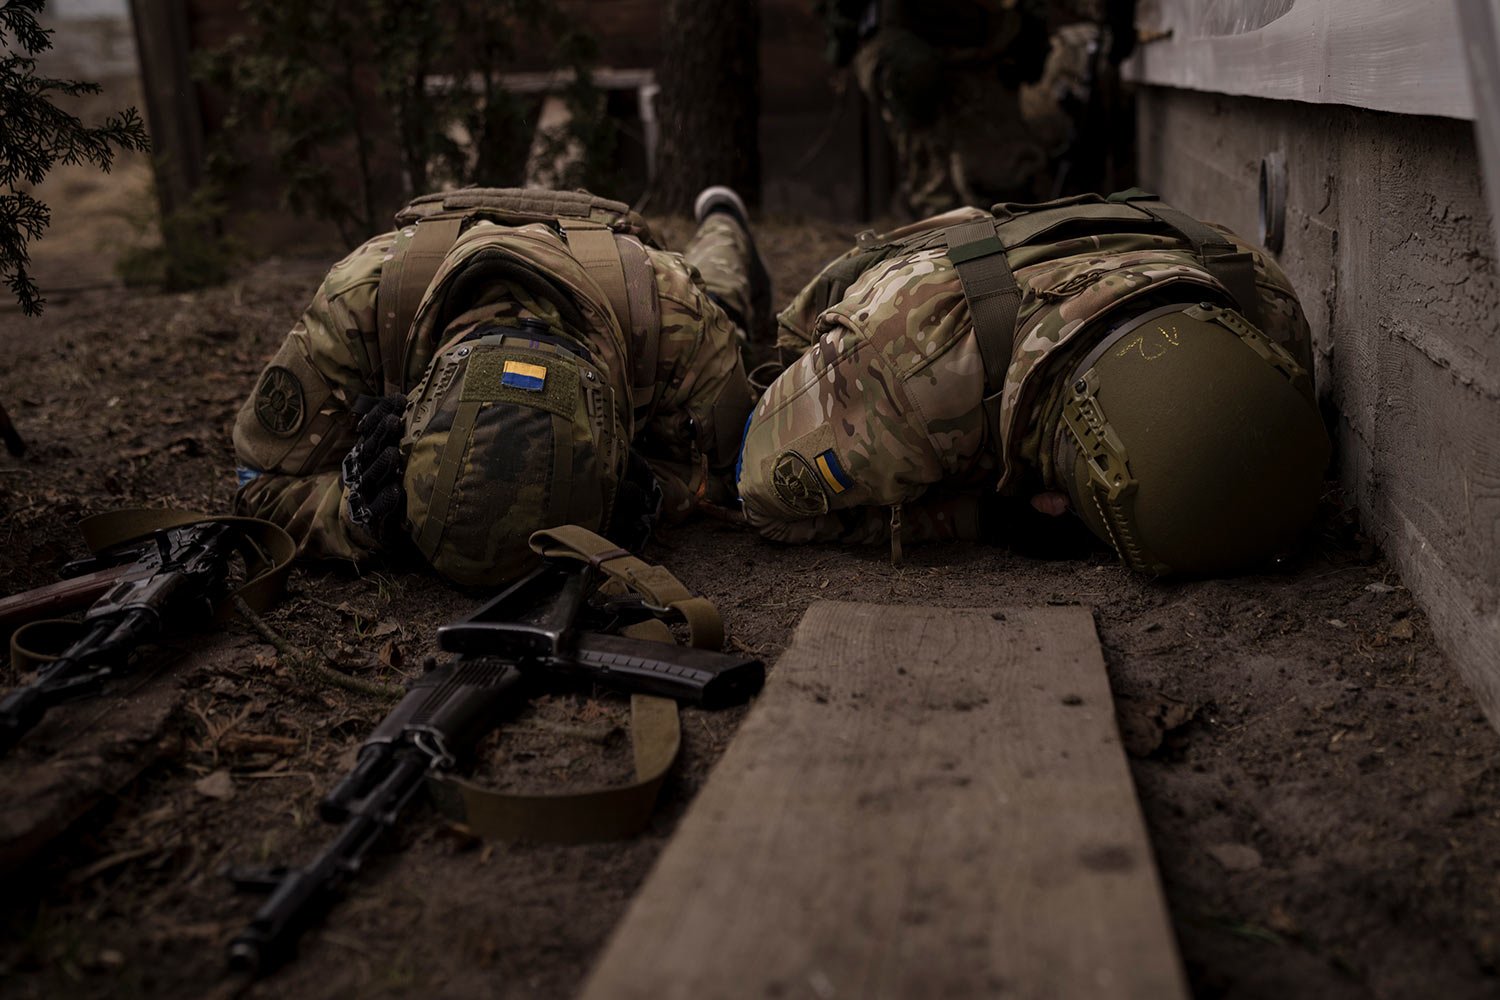  Ukrainian soldiers take cover from incoming artillery fire in Irpin, outskirts of Kyiv, Ukraine, Sunday, March 13, 2022. (AP Photo/Felipe Dana)  